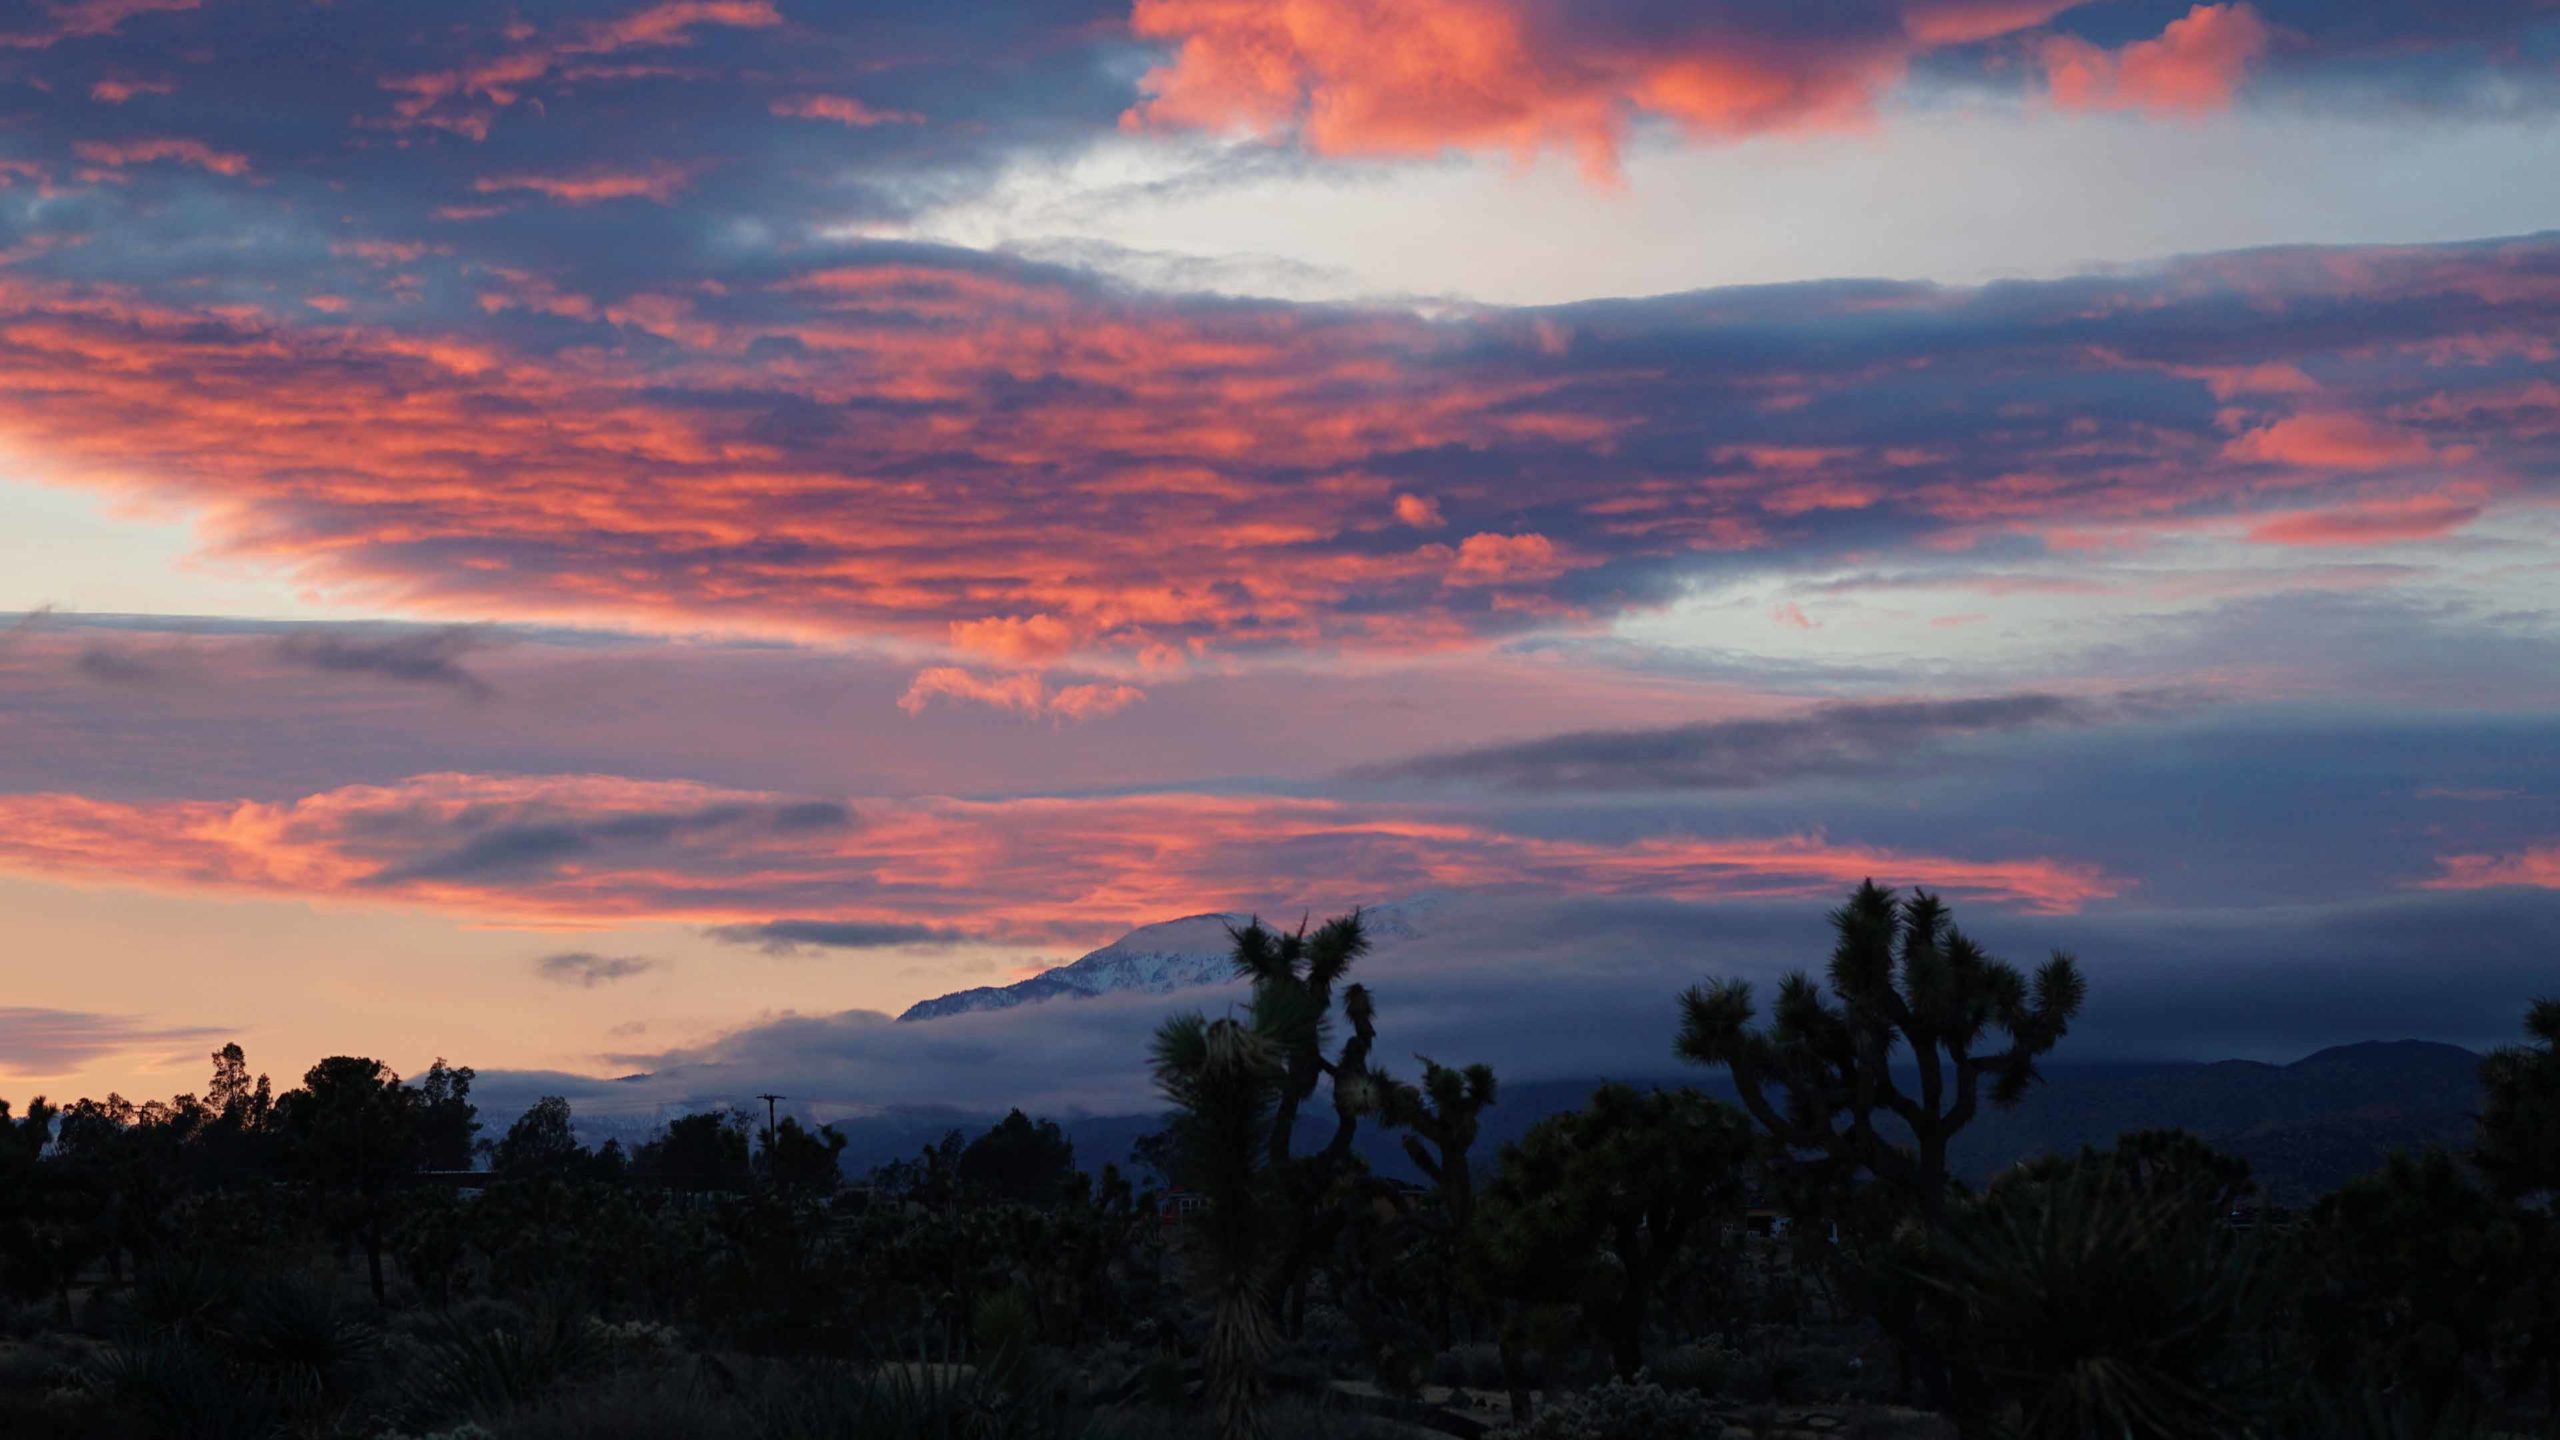 Serene sunset in Joshua Tree, California, with vibrant pink and blue clouds capping the sky. A mountain in the distance conveys a sense of deep calm and serenity—reflective of the sensations that acupuncture treatments provide.